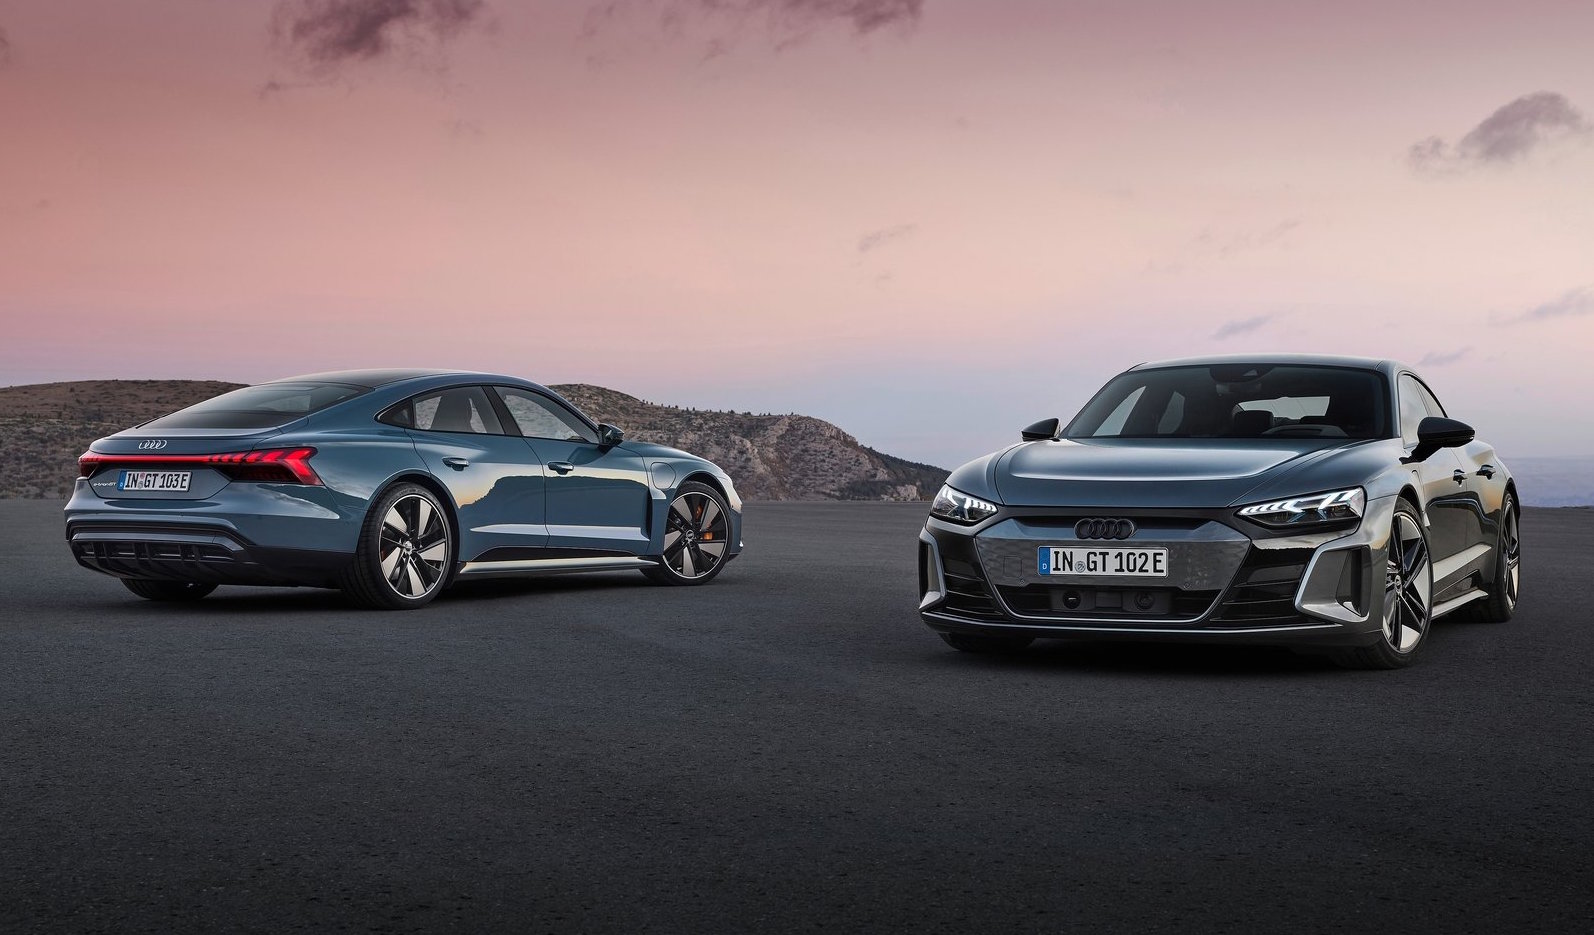 Fully electric Audi e-tron GT and RS e-tron GT revealed